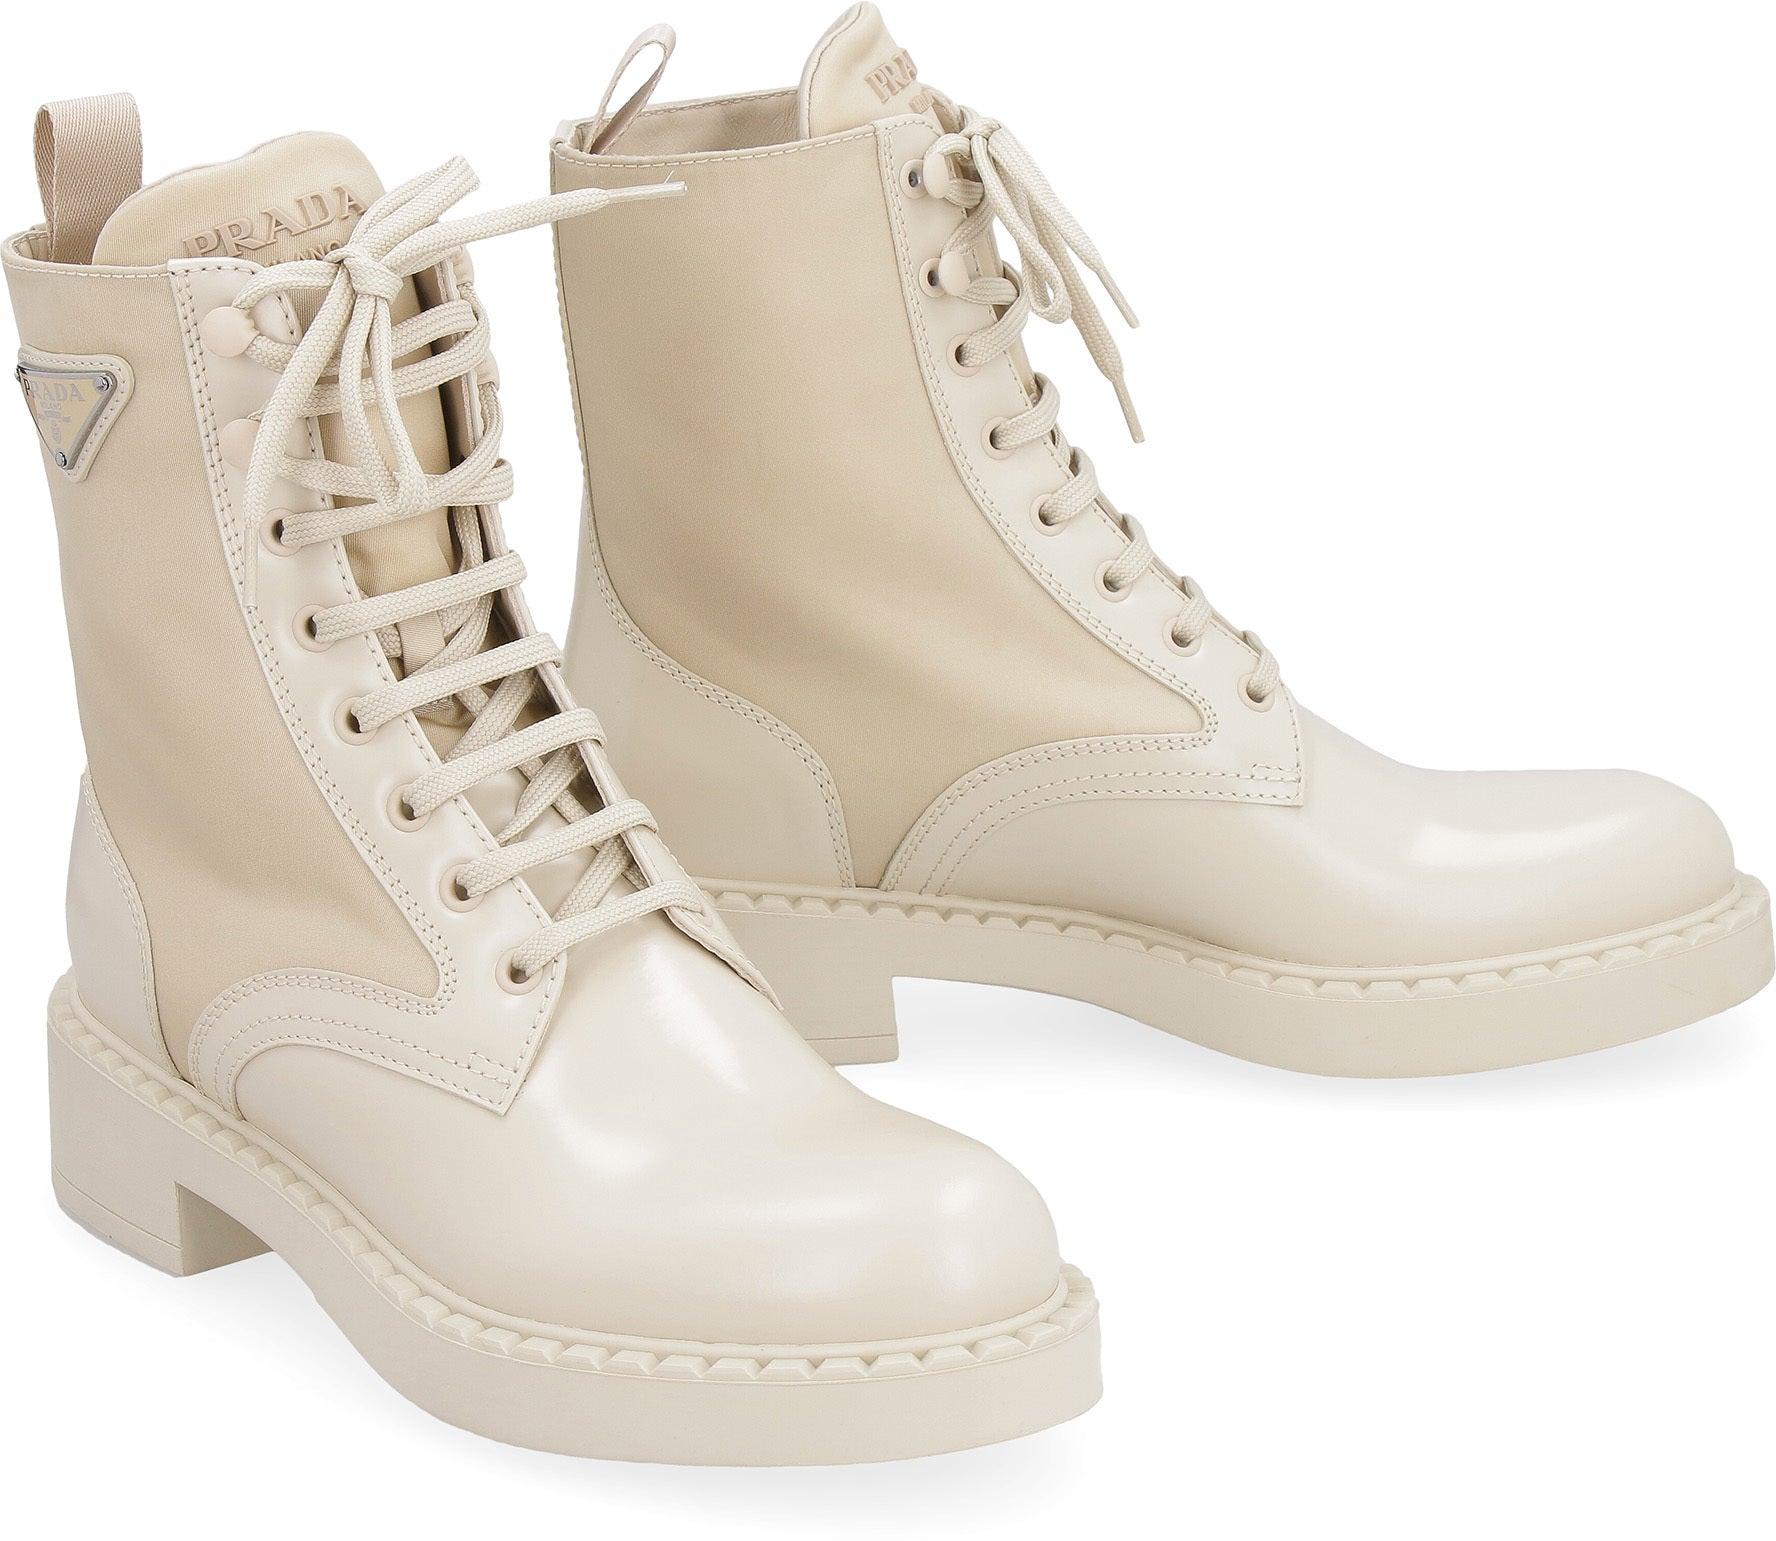 Prada Lace-up Ankle Boots in Natural | Lyst